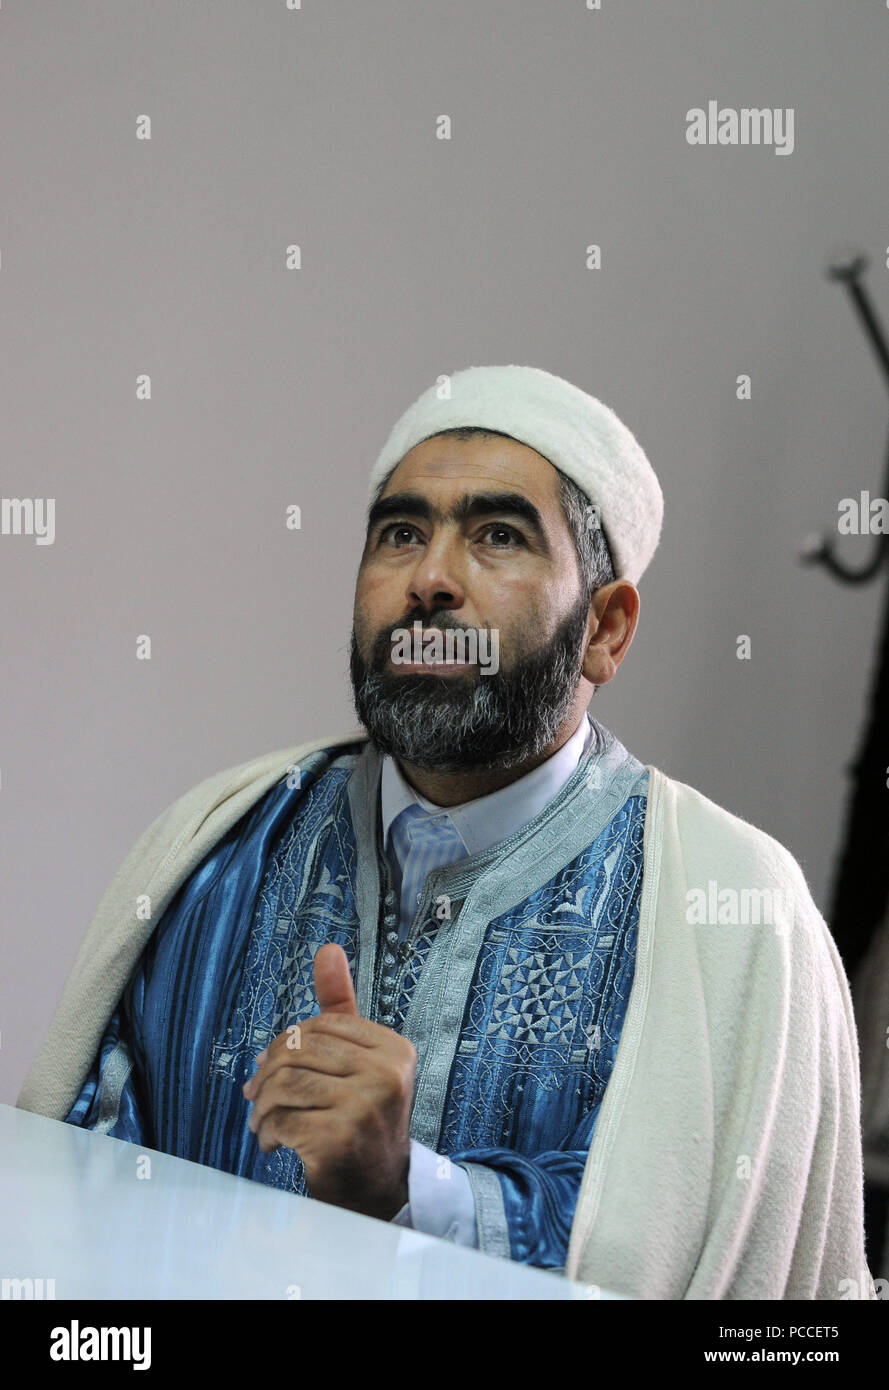 February 12, 2013 - Tunis, Tunisia: Portrait of Adel Almi, a  radical Islamist figure. He is the leader of The Moderate Association for Awareness and Reform, an association that strives for the implemention of Sharia islamic law in Tunisia. Portrait d'Adel Almi, un islamiste tunisien partisan de l'application de la sharia en Tunisie. *** FRANCE OUT / NO SALES TO FRENCH MEDIA *** Stock Photo